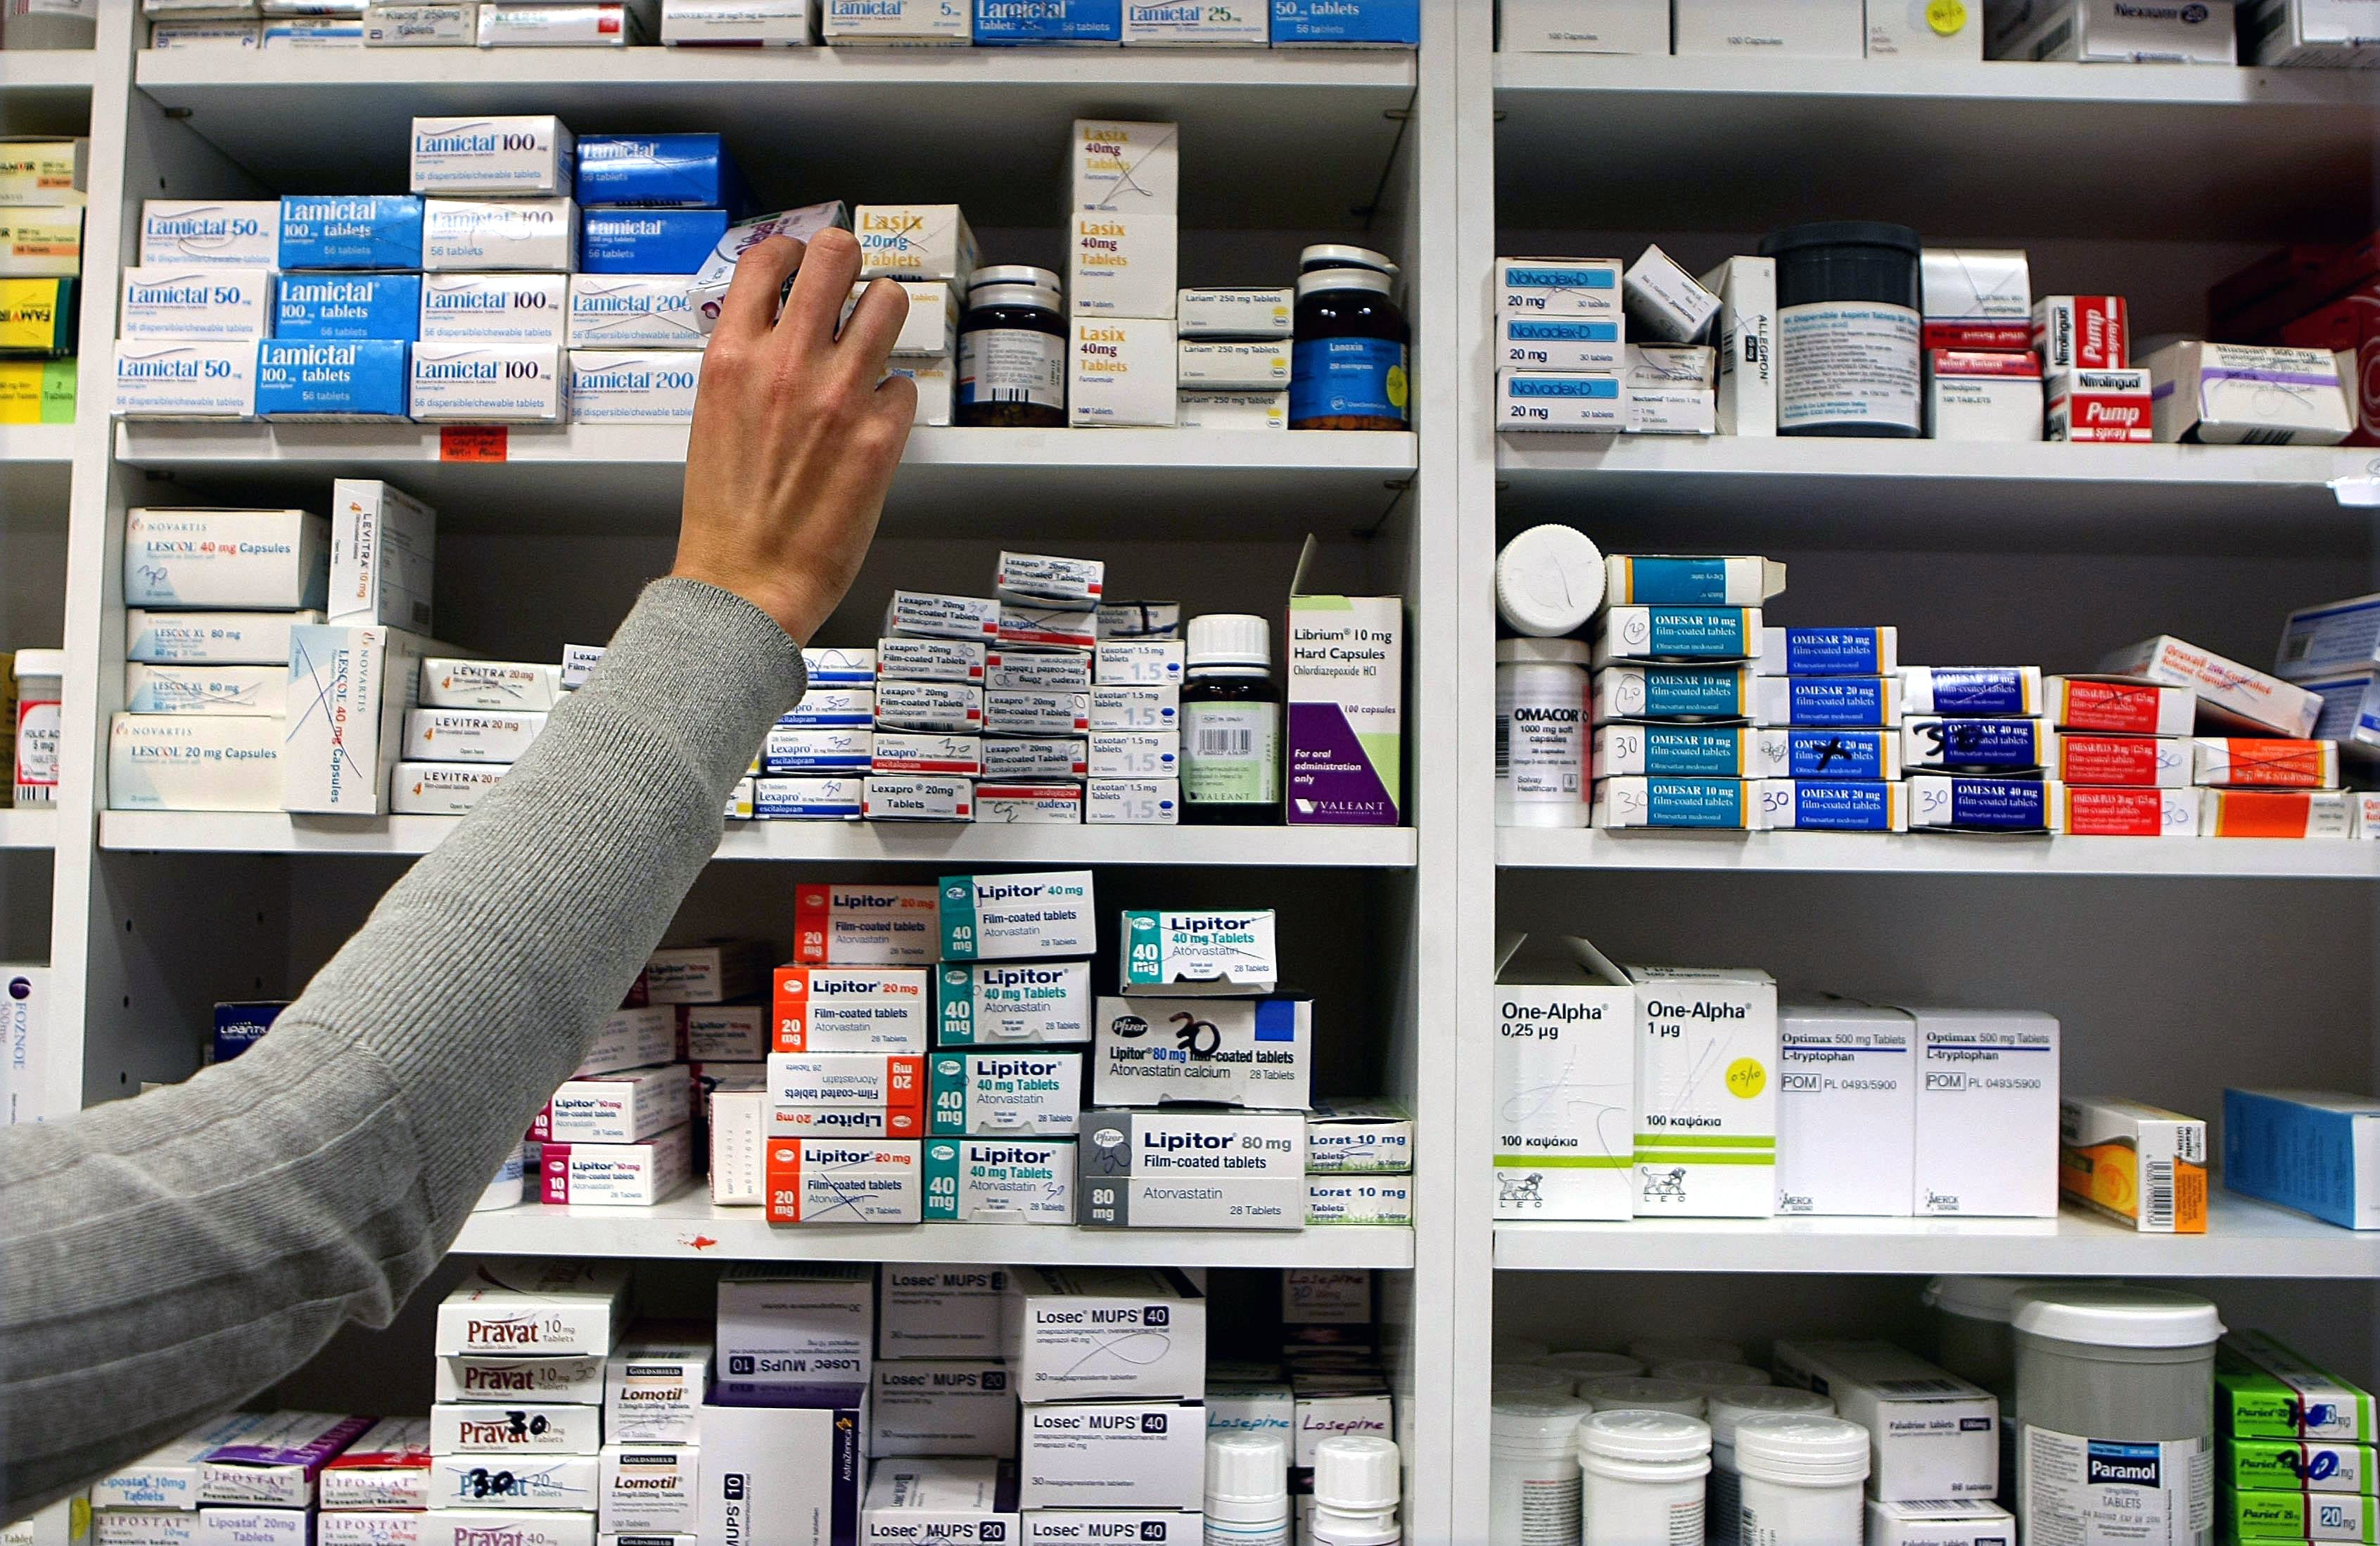 Patients are being prescribed medicines, but can’t afford to buy them